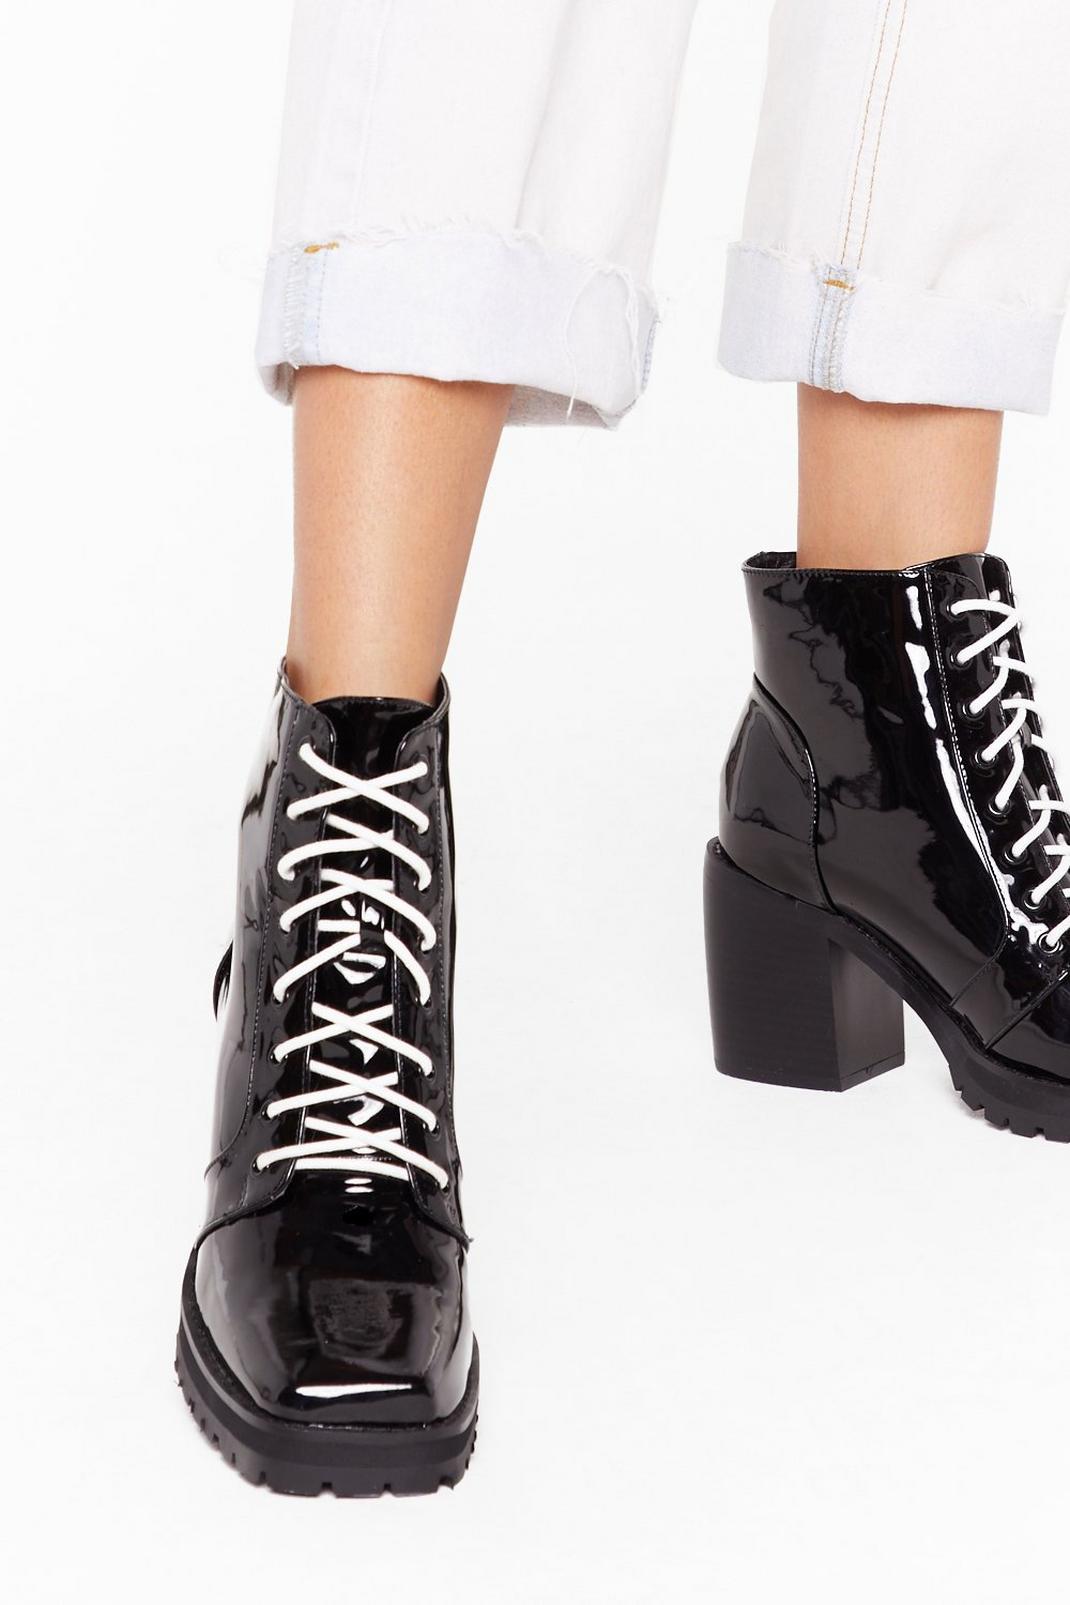 Livin' in the Contrast Lane Patent Ankle Boots image number 1